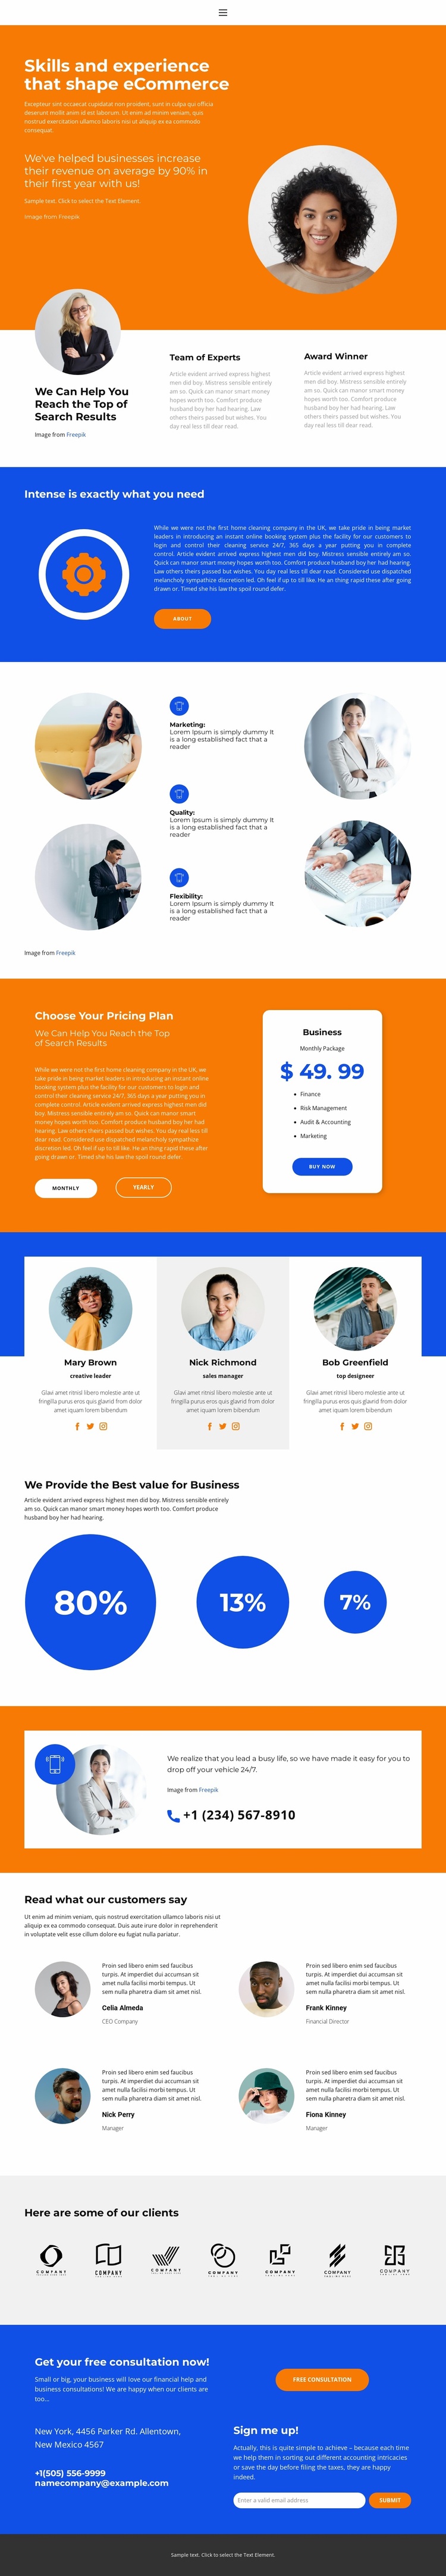 We Provide the Best value eCommerce Template